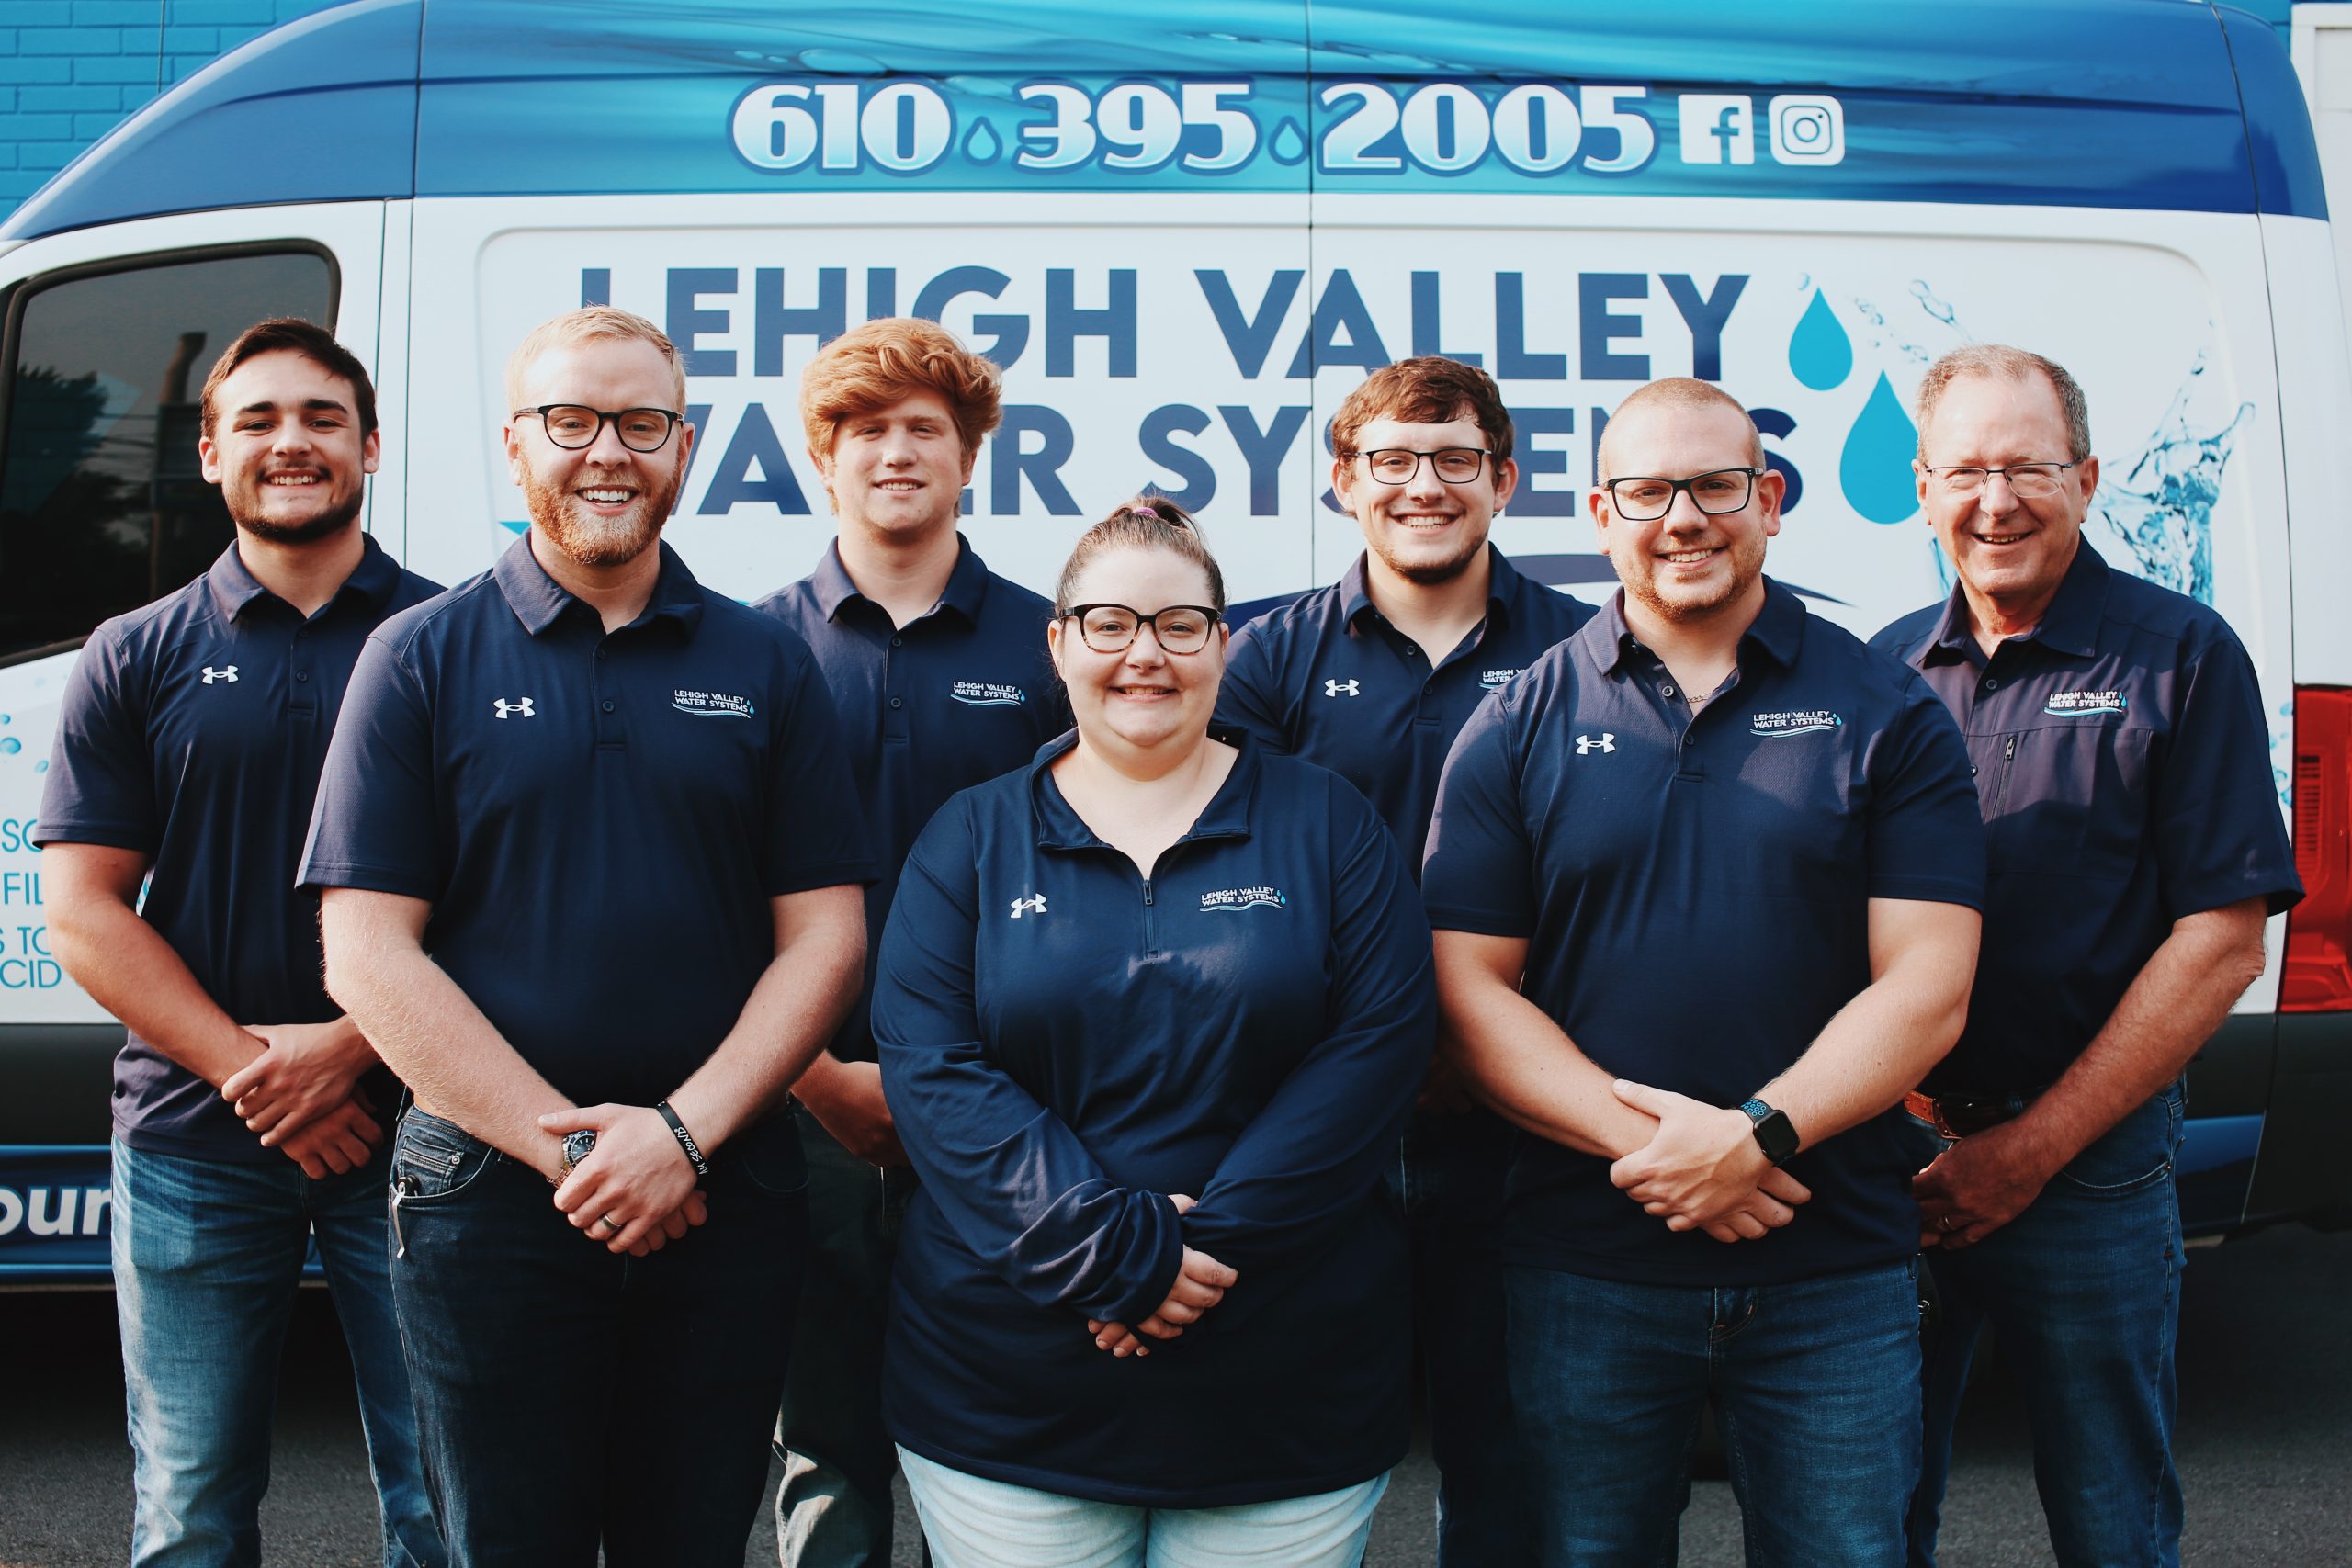 Read more about the article Lehigh Valley Water Systems Is Proud to Serve the Lehigh Valley Area and Beyond